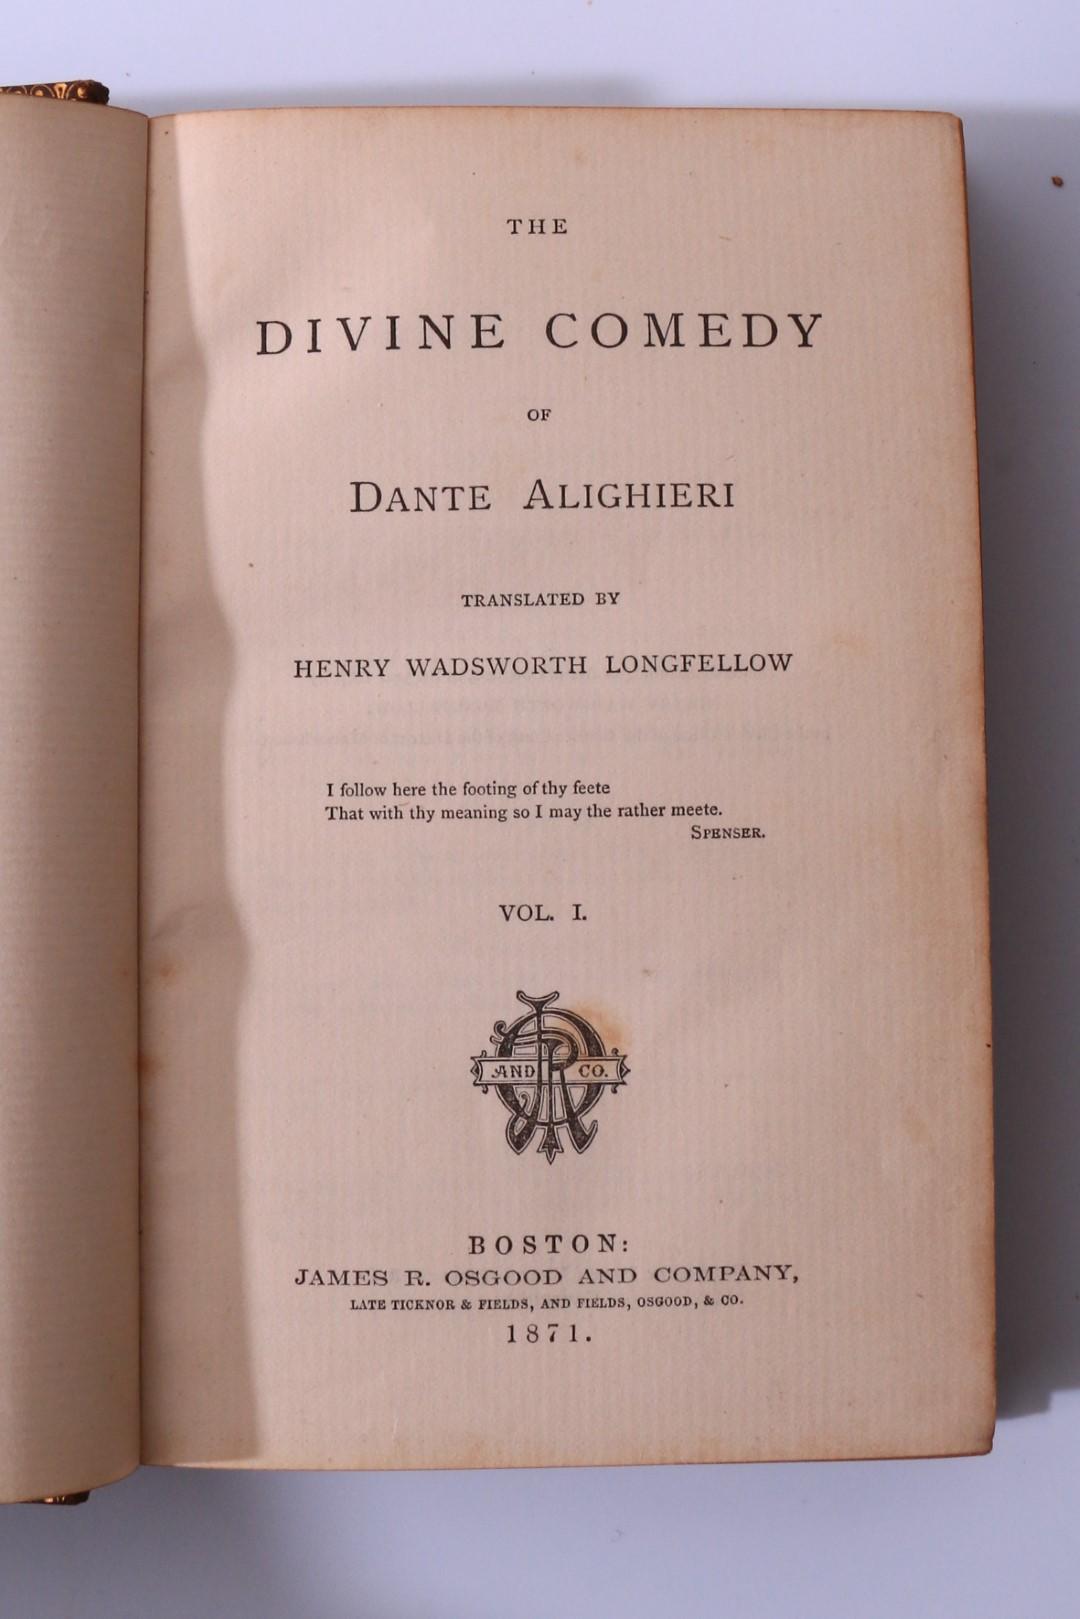 Dante Alighieri [trans. Henry Wadsworth Longfellow] - The Divine Comedy - Osgood and Co., 1871, First Edition.